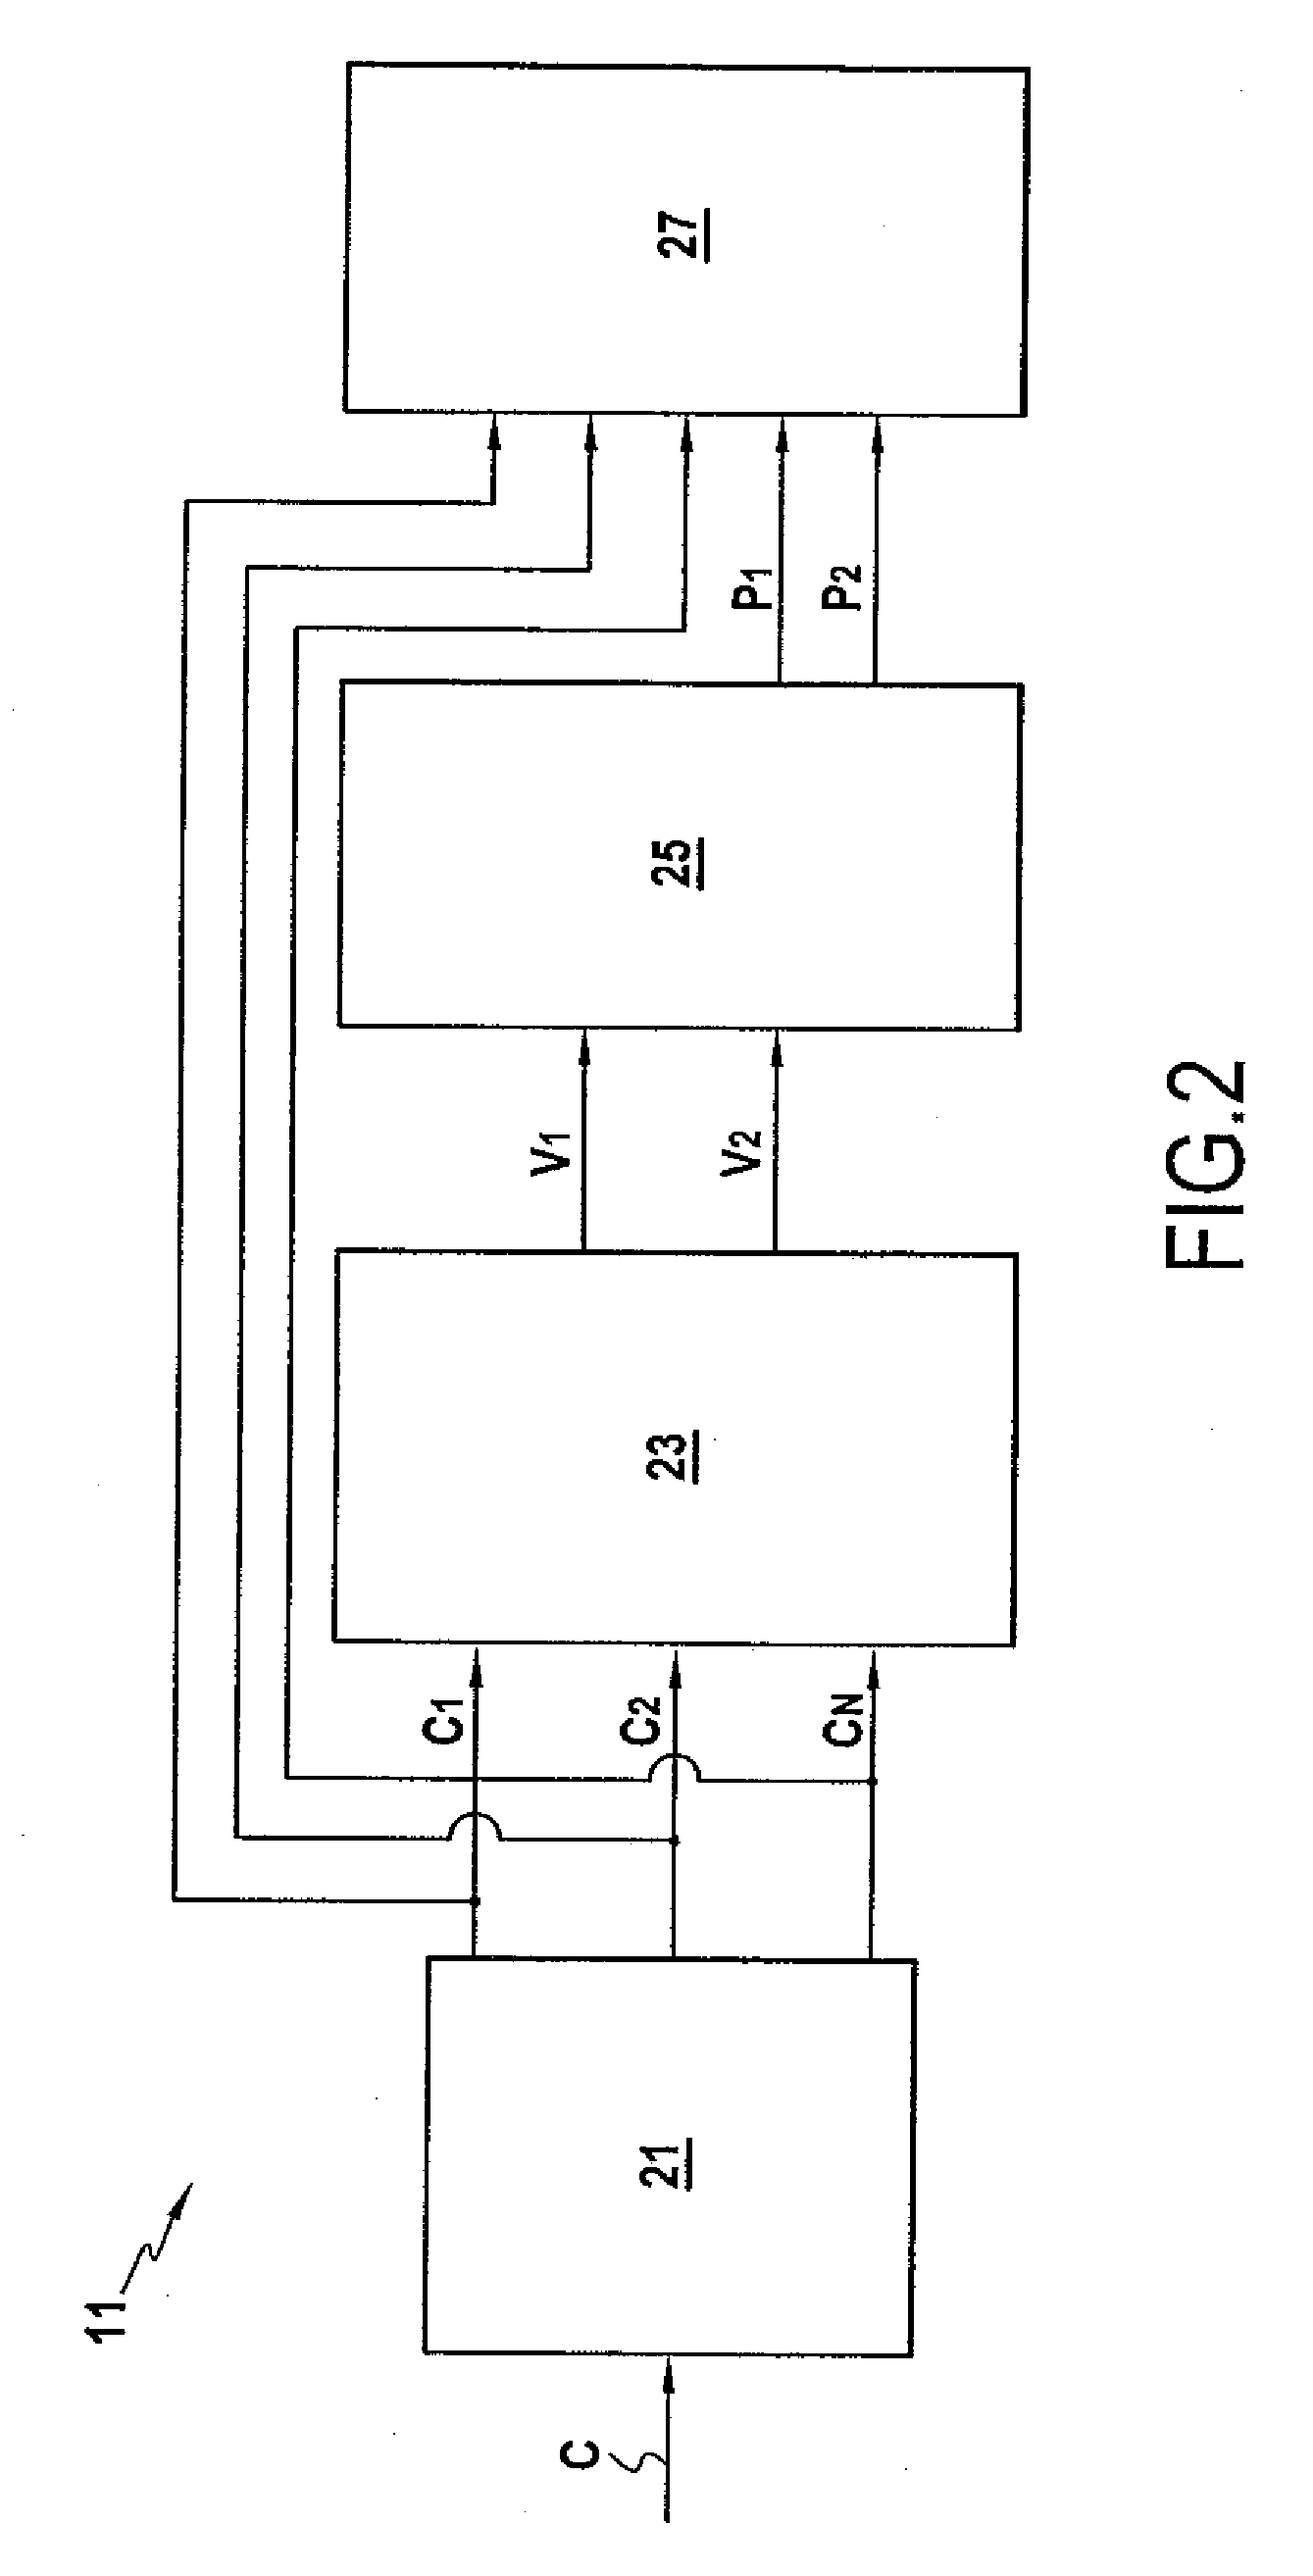 Method and System for Encoding a Data Sequence